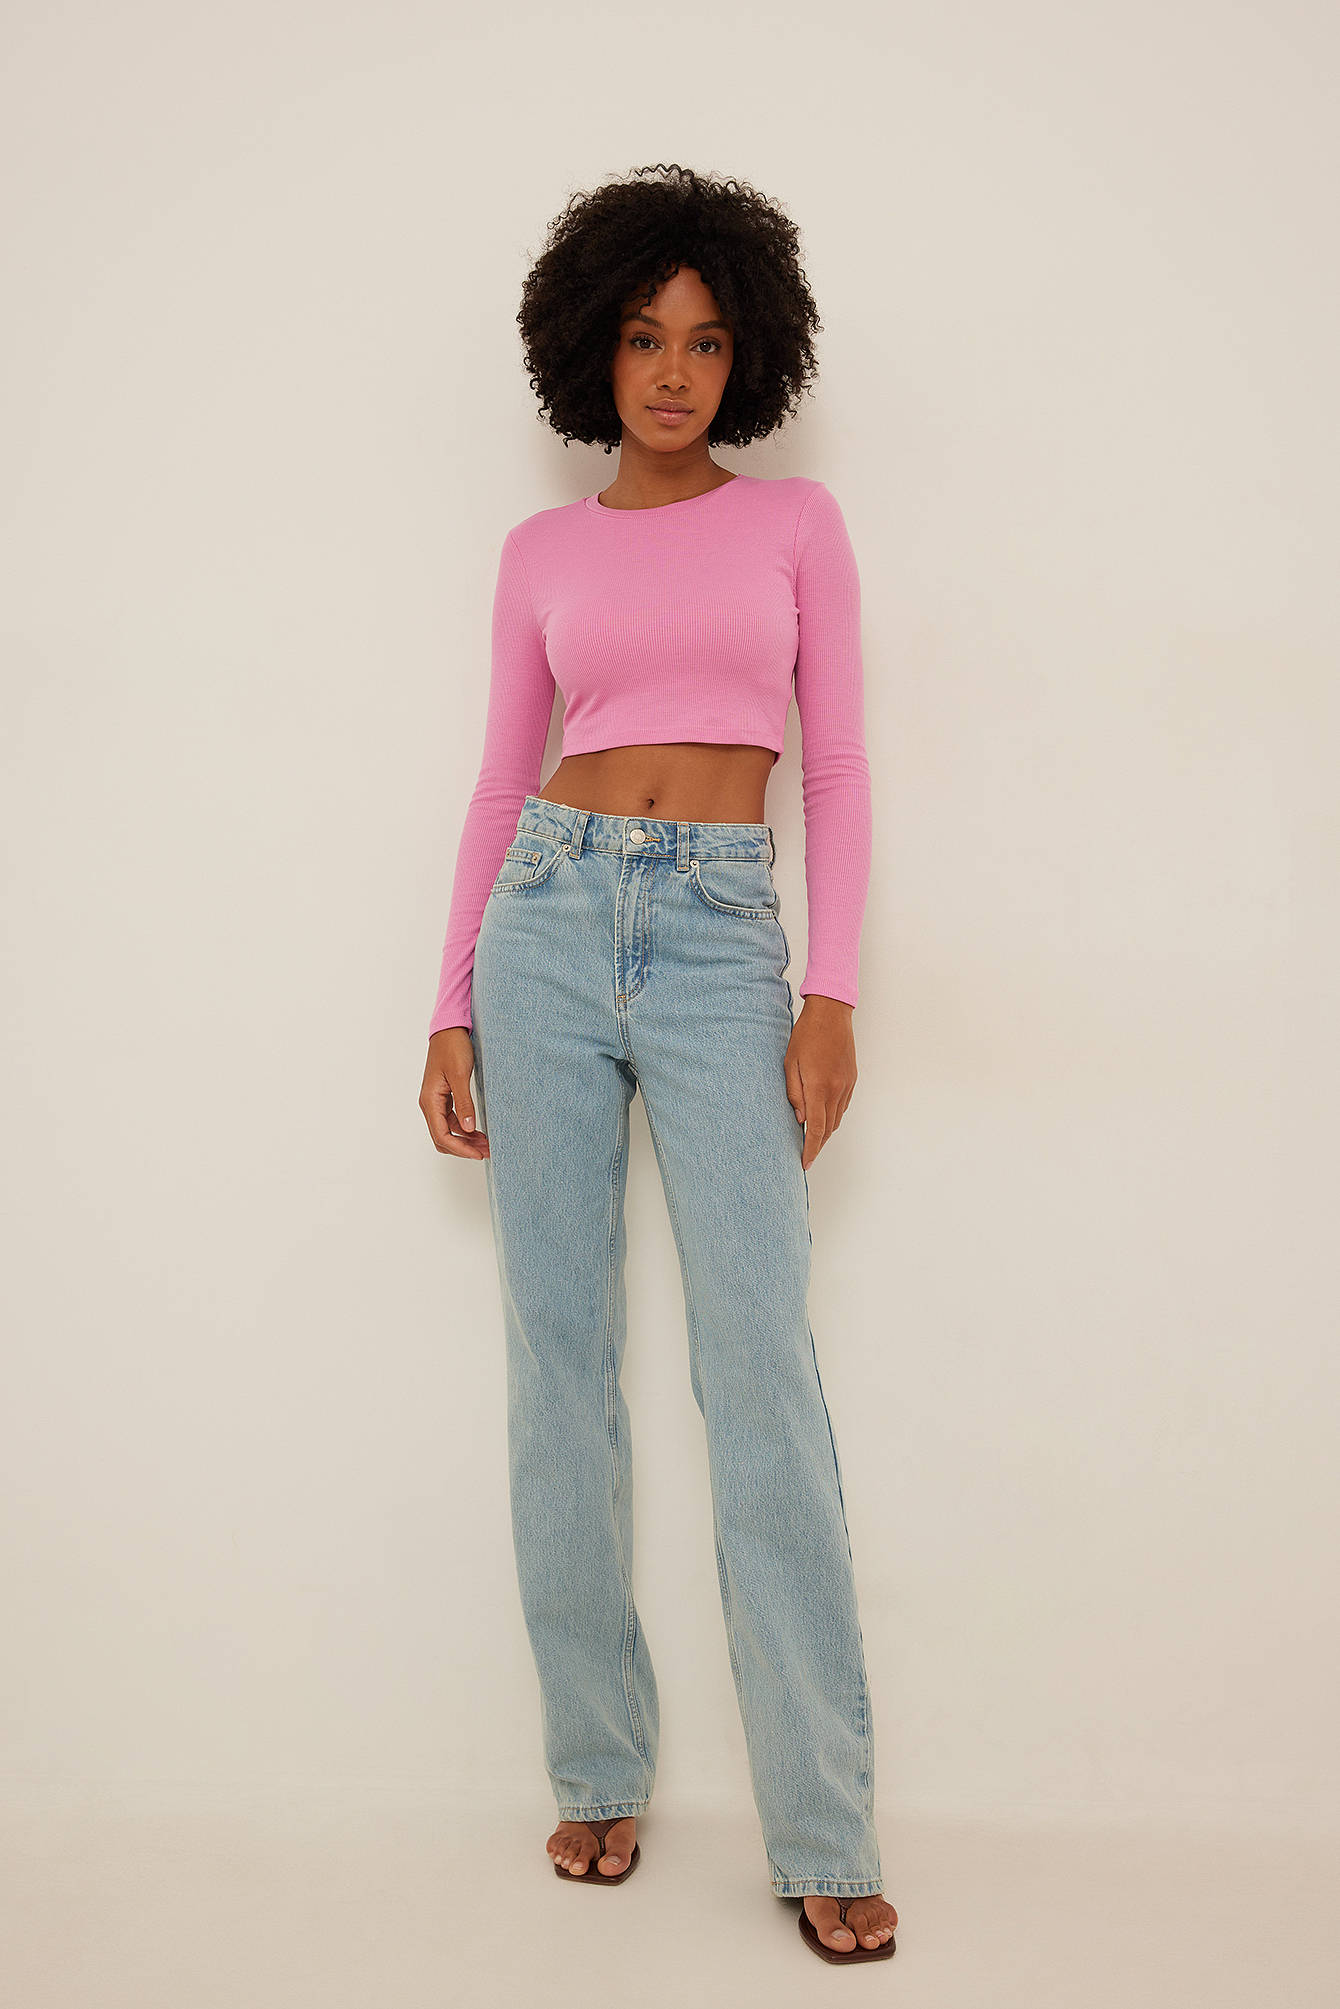 Round Neck Ribbed Long Sleeve Crop Top Outfit.